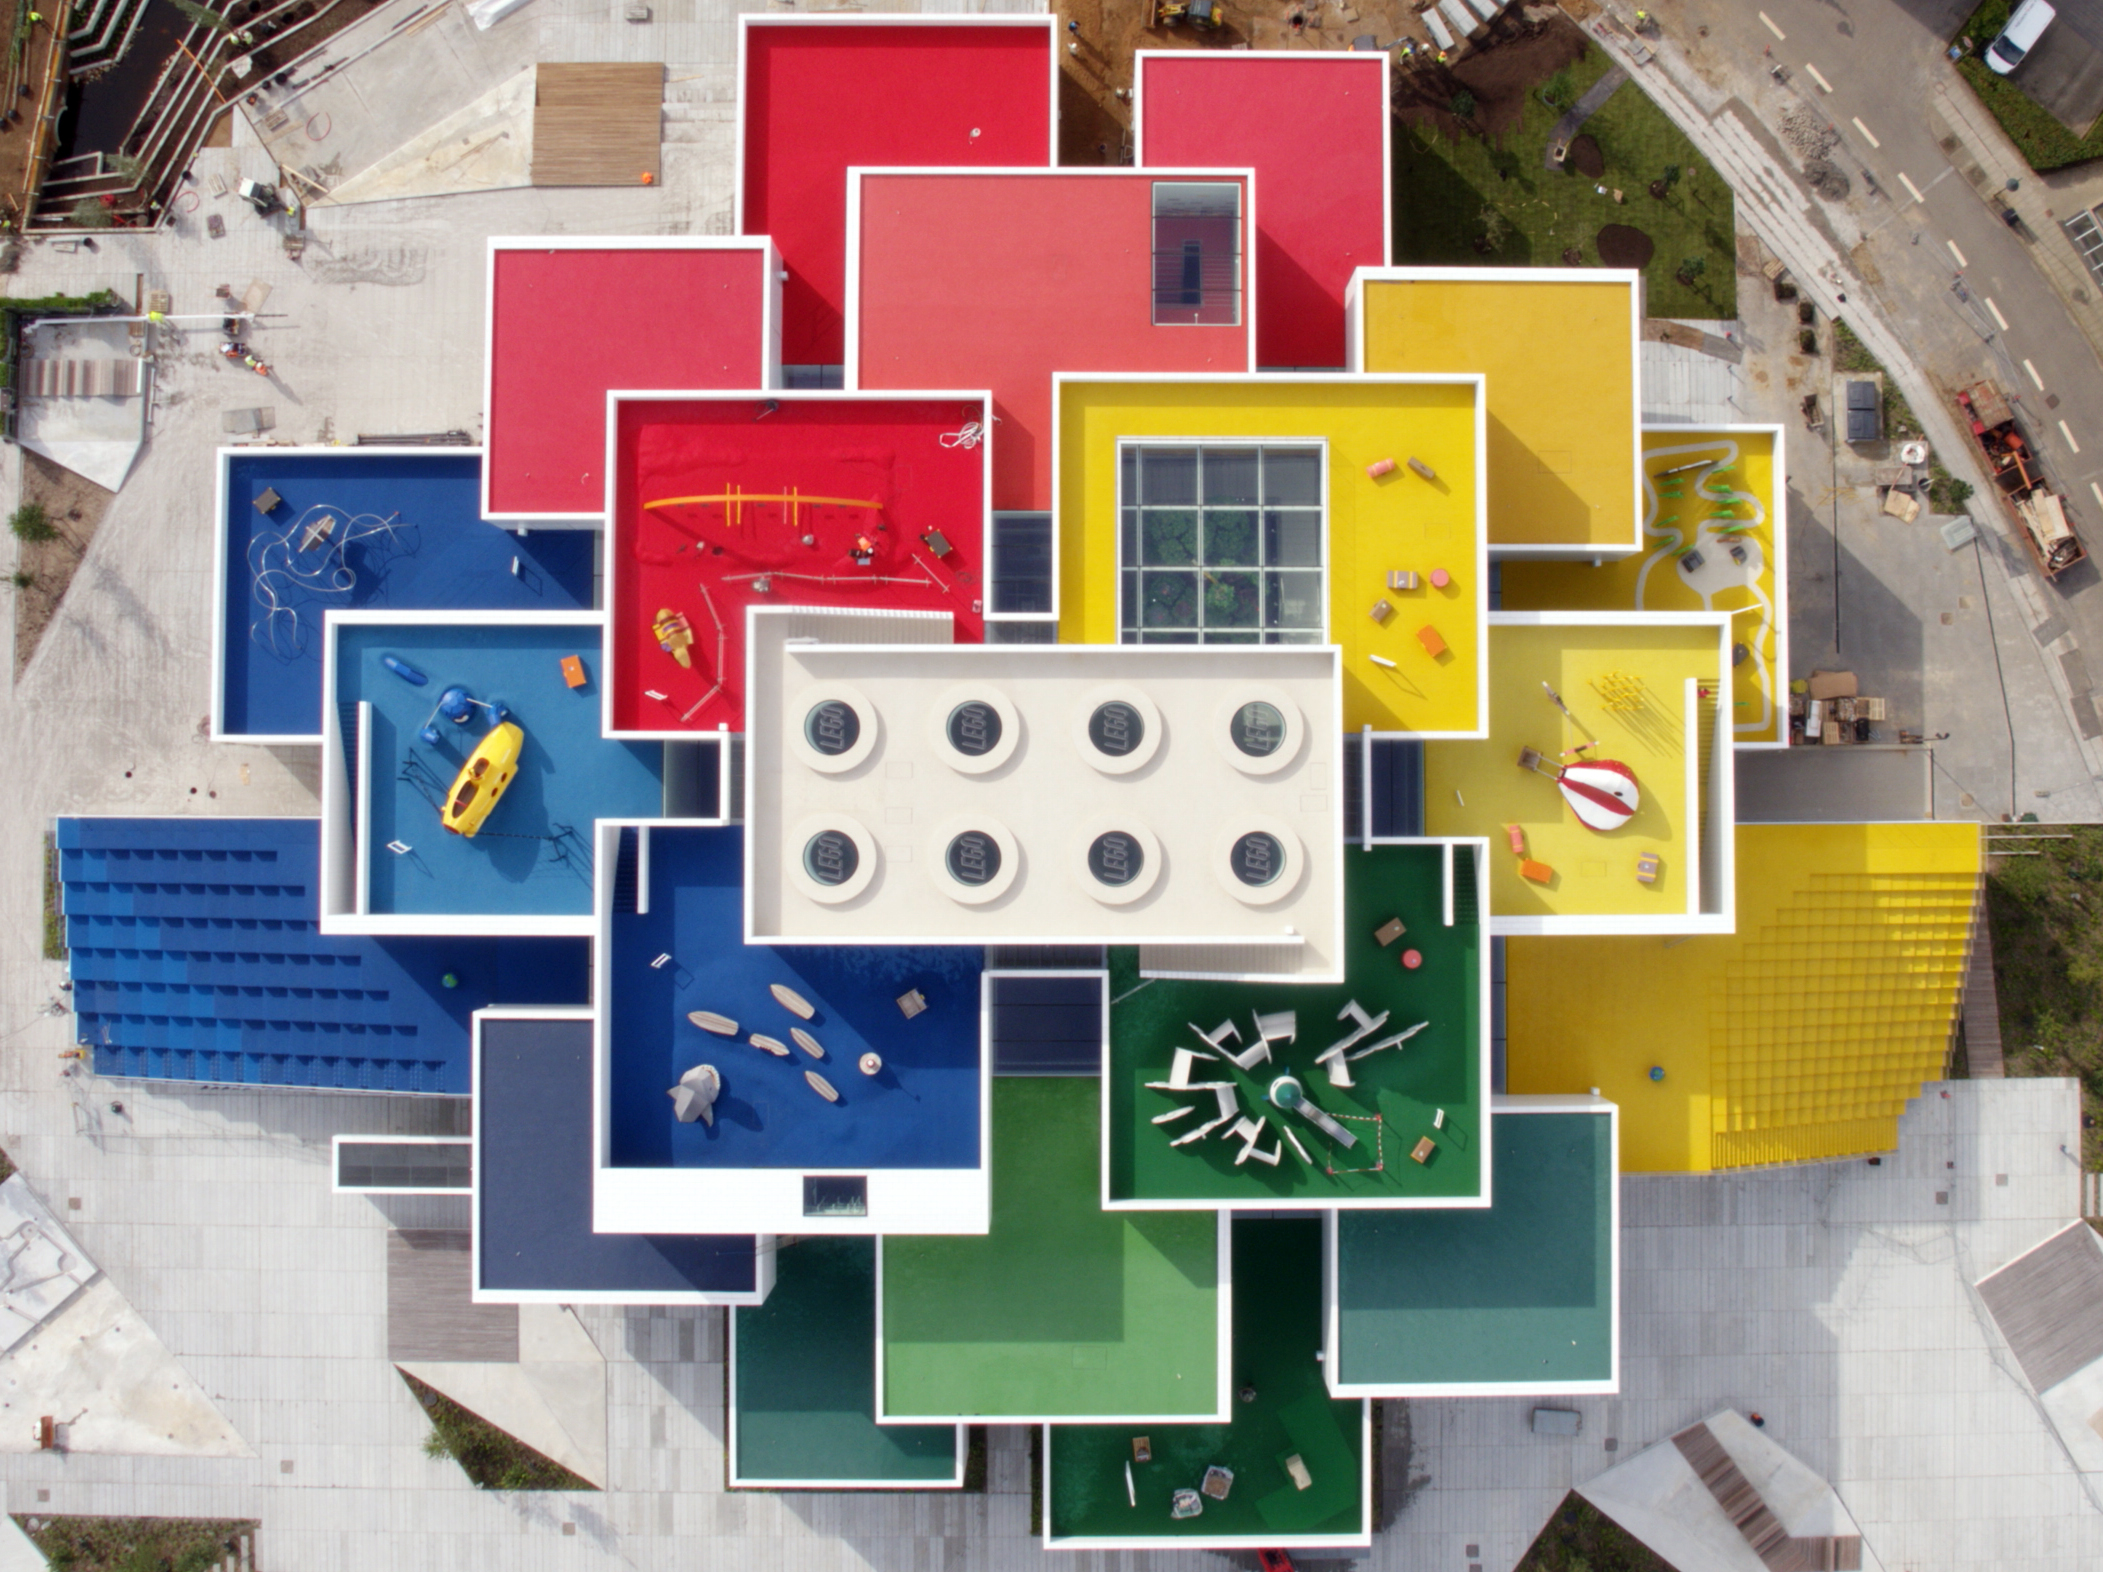 architecture, Building, Cityscape, City, Aerial view, LEGO, Bricks, Road, Denmark, LEGO House, Colorful, Rooftops Wallpaper